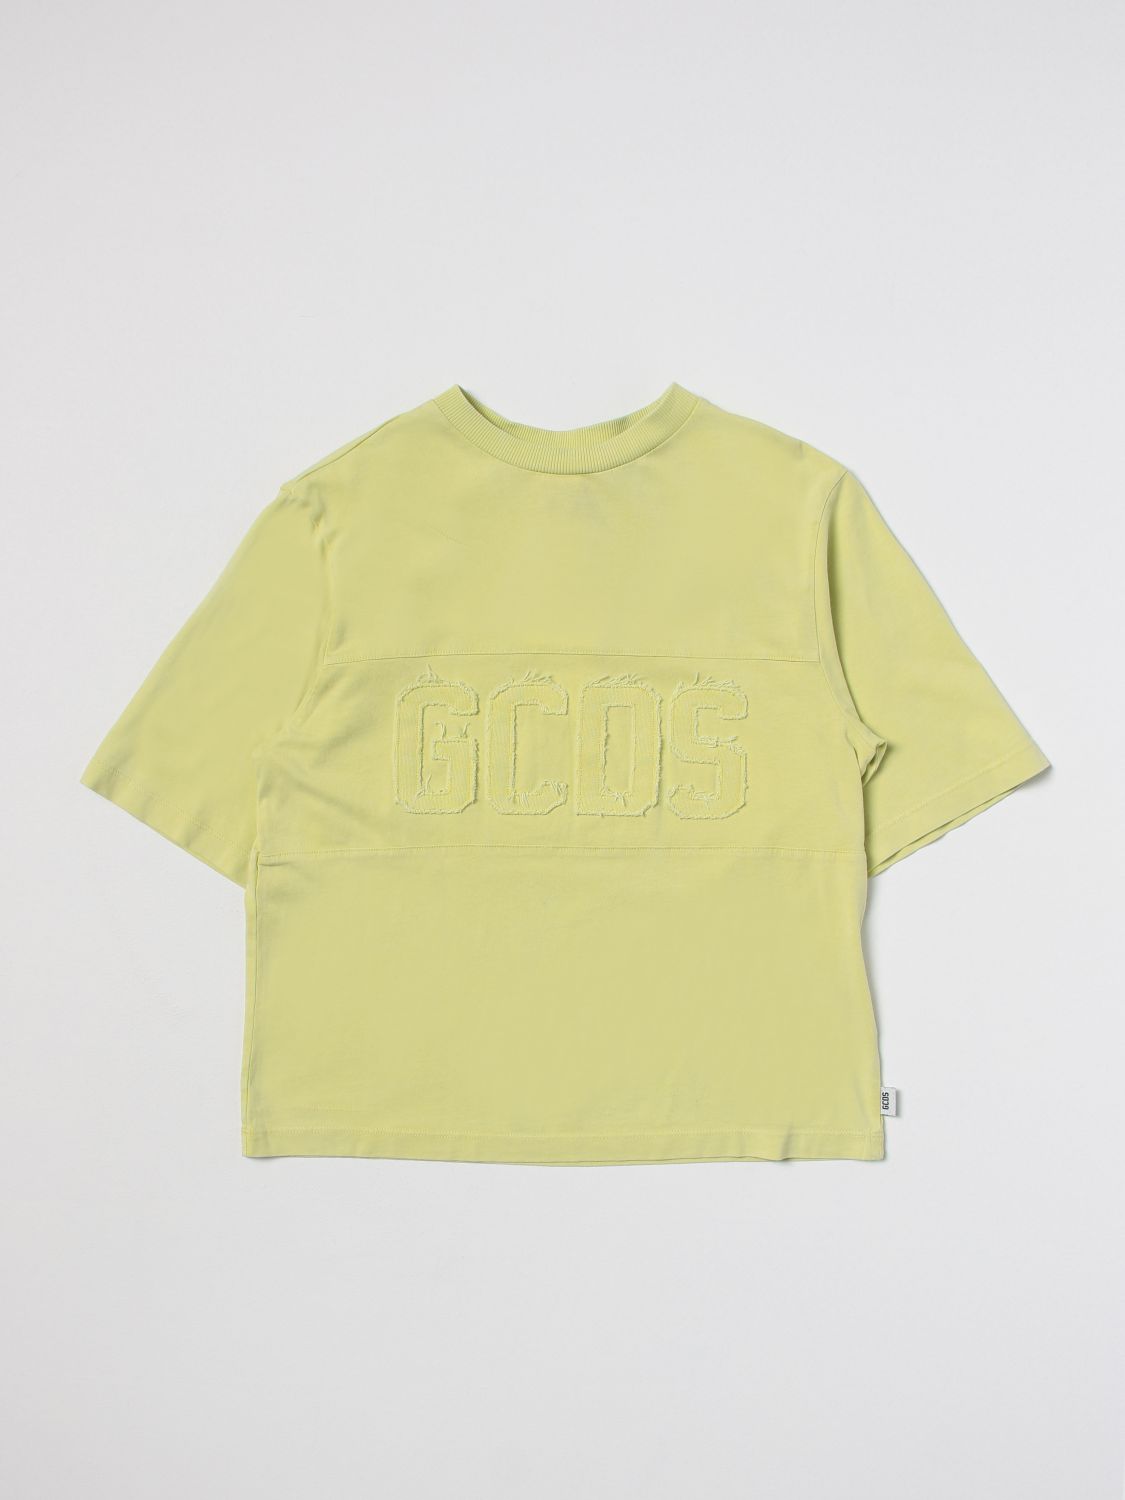 Gcds T-shirt  Kids Kids Color Yellow In Lime